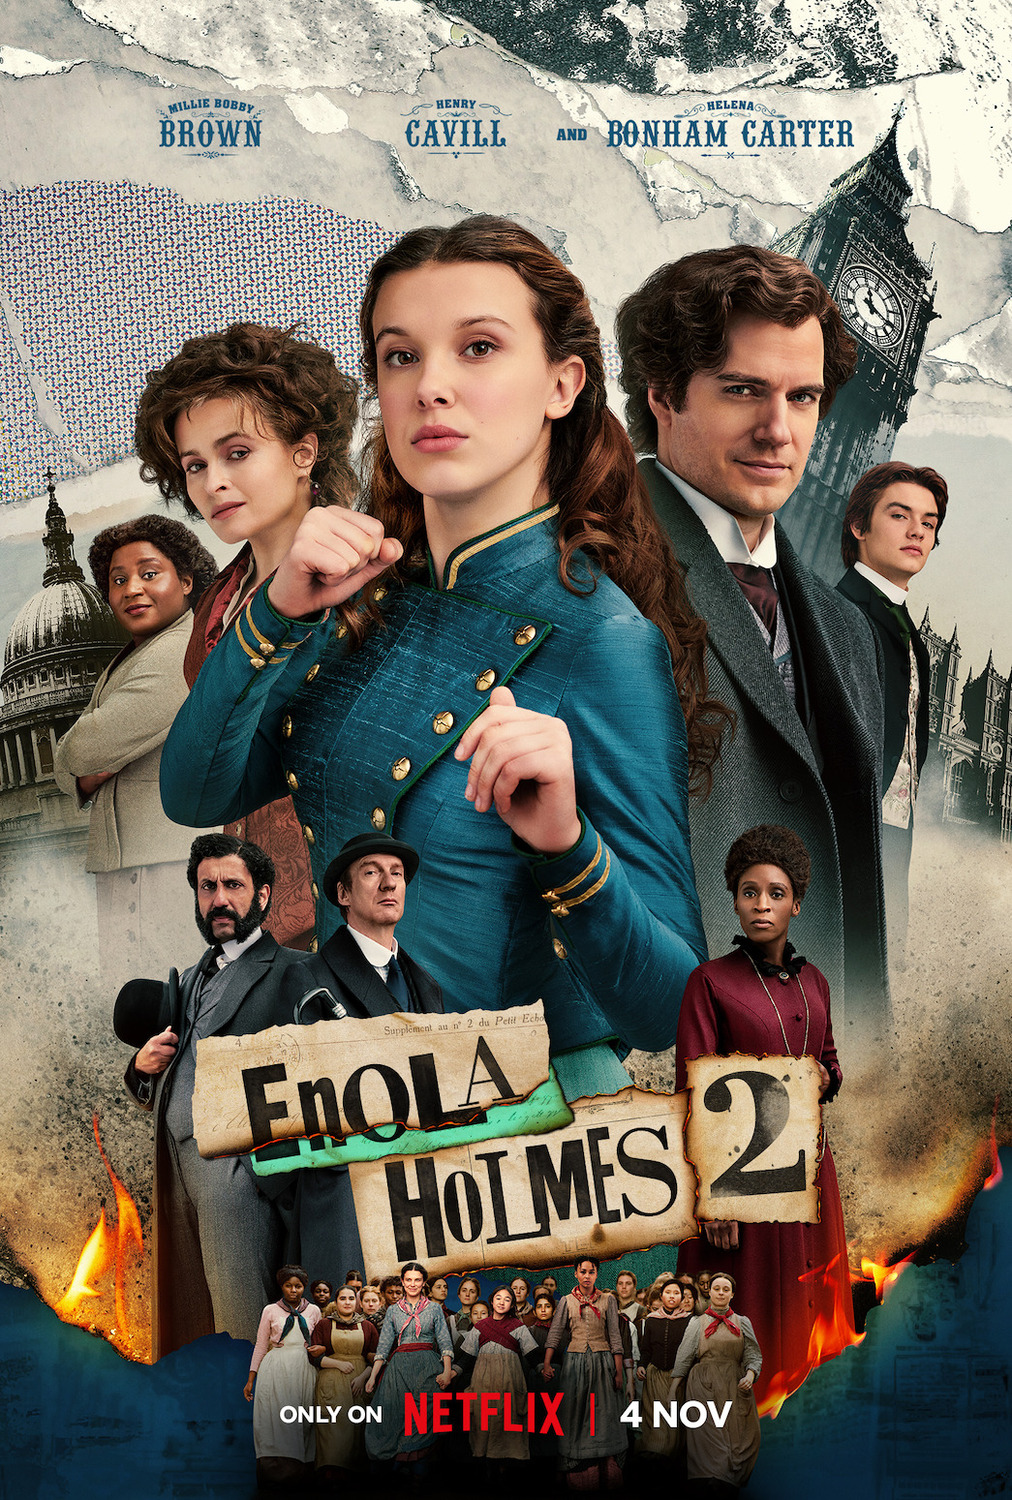 Enola Holmes 2 is inspired by real history - but how true is it?